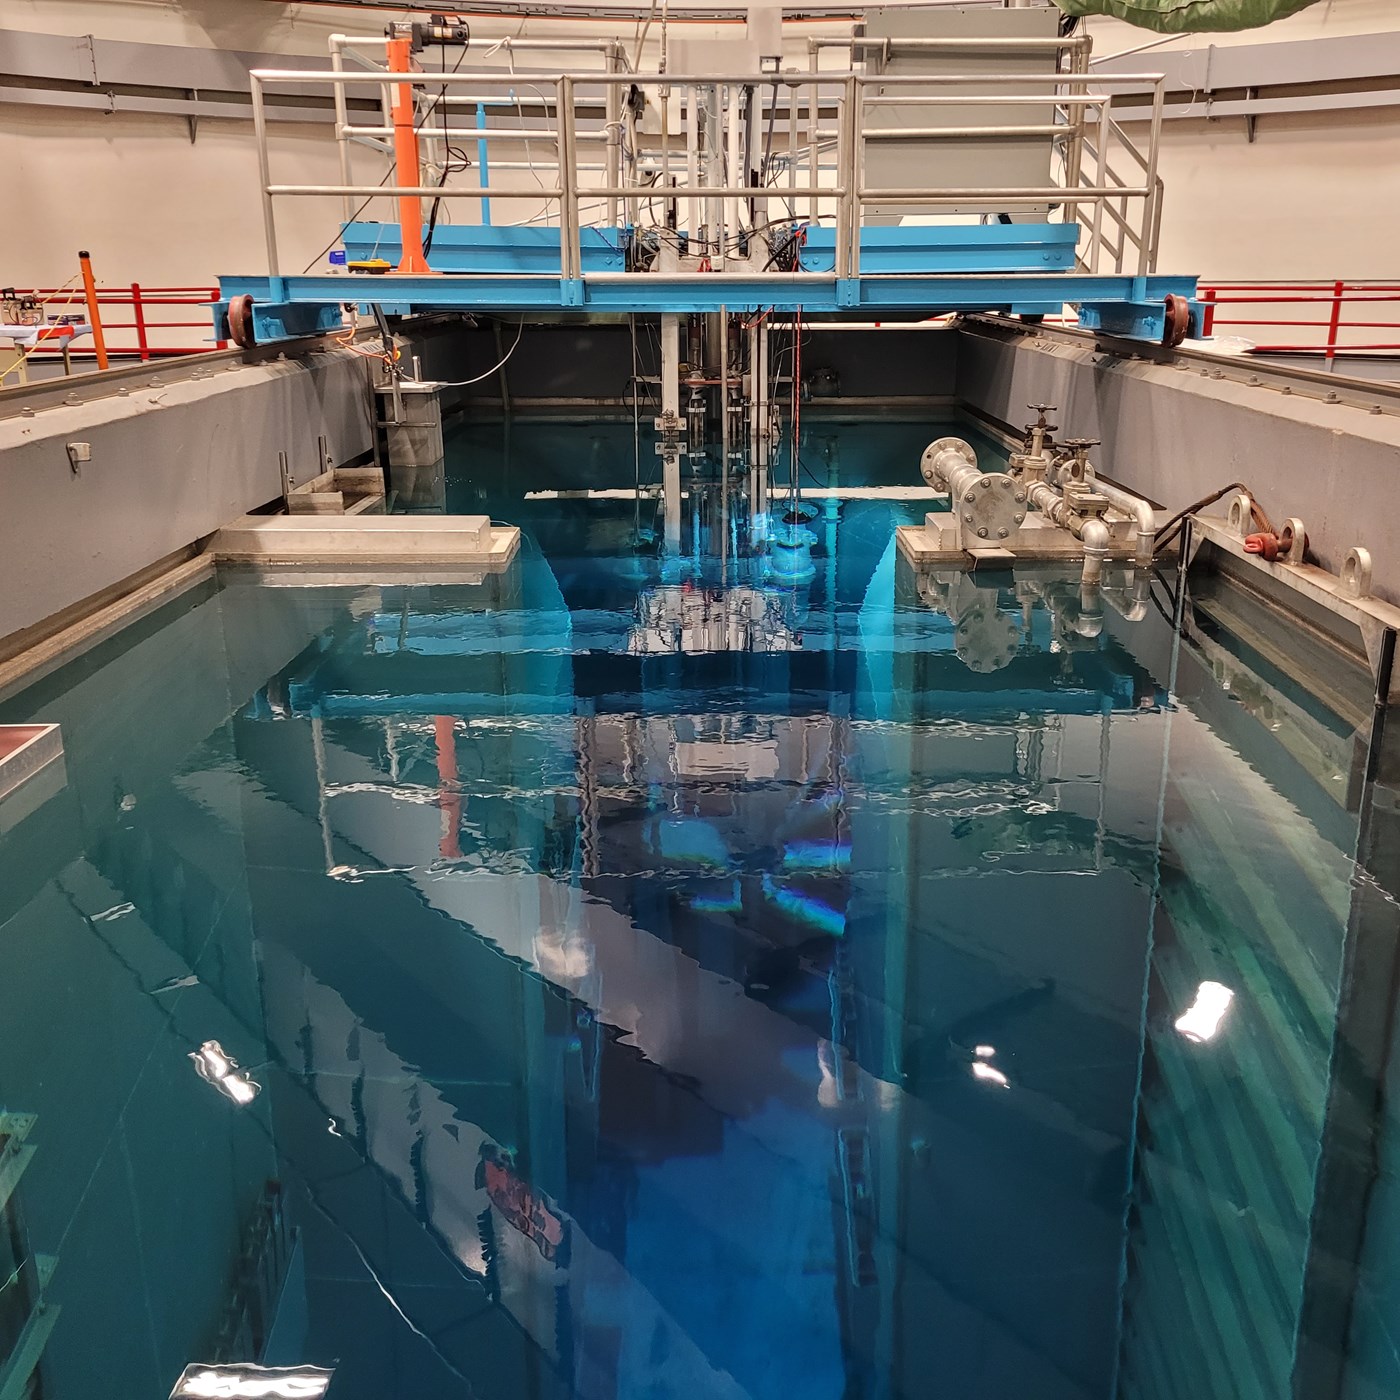 Cooling pool in UMass Lowell Radiation Laboratory